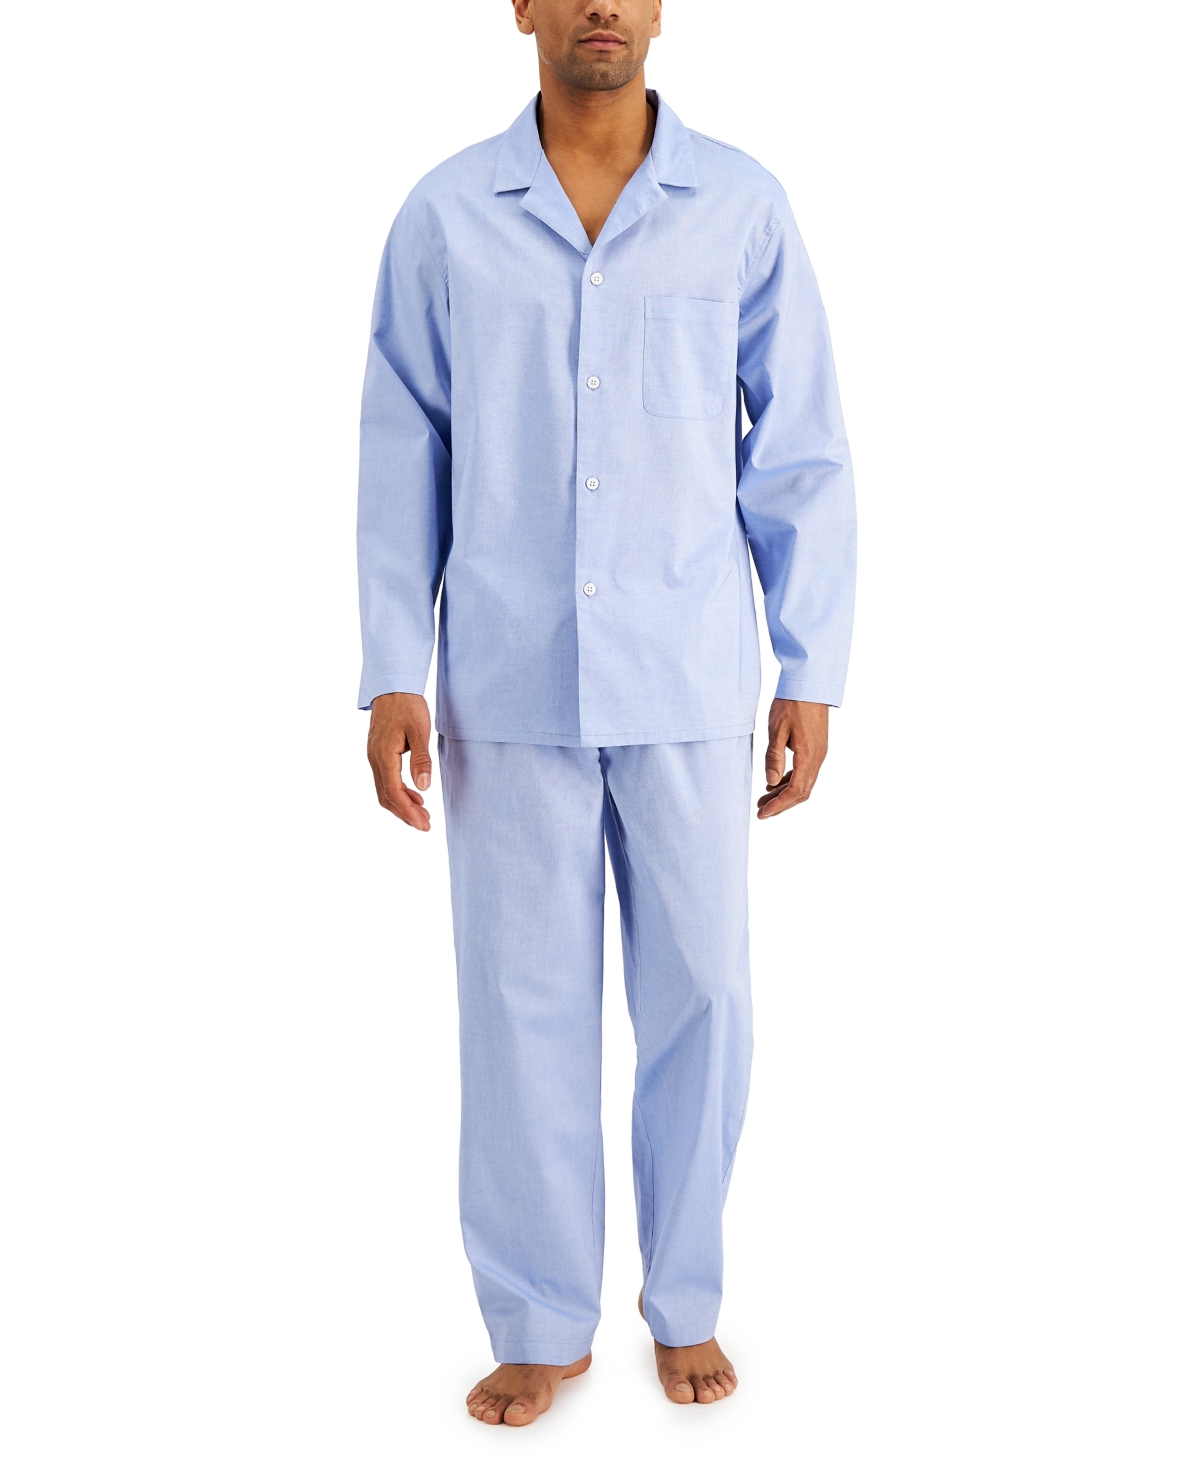 Men's 2-Pc. Solid Oxford Pajama Set, Created for Macy's - Blue White